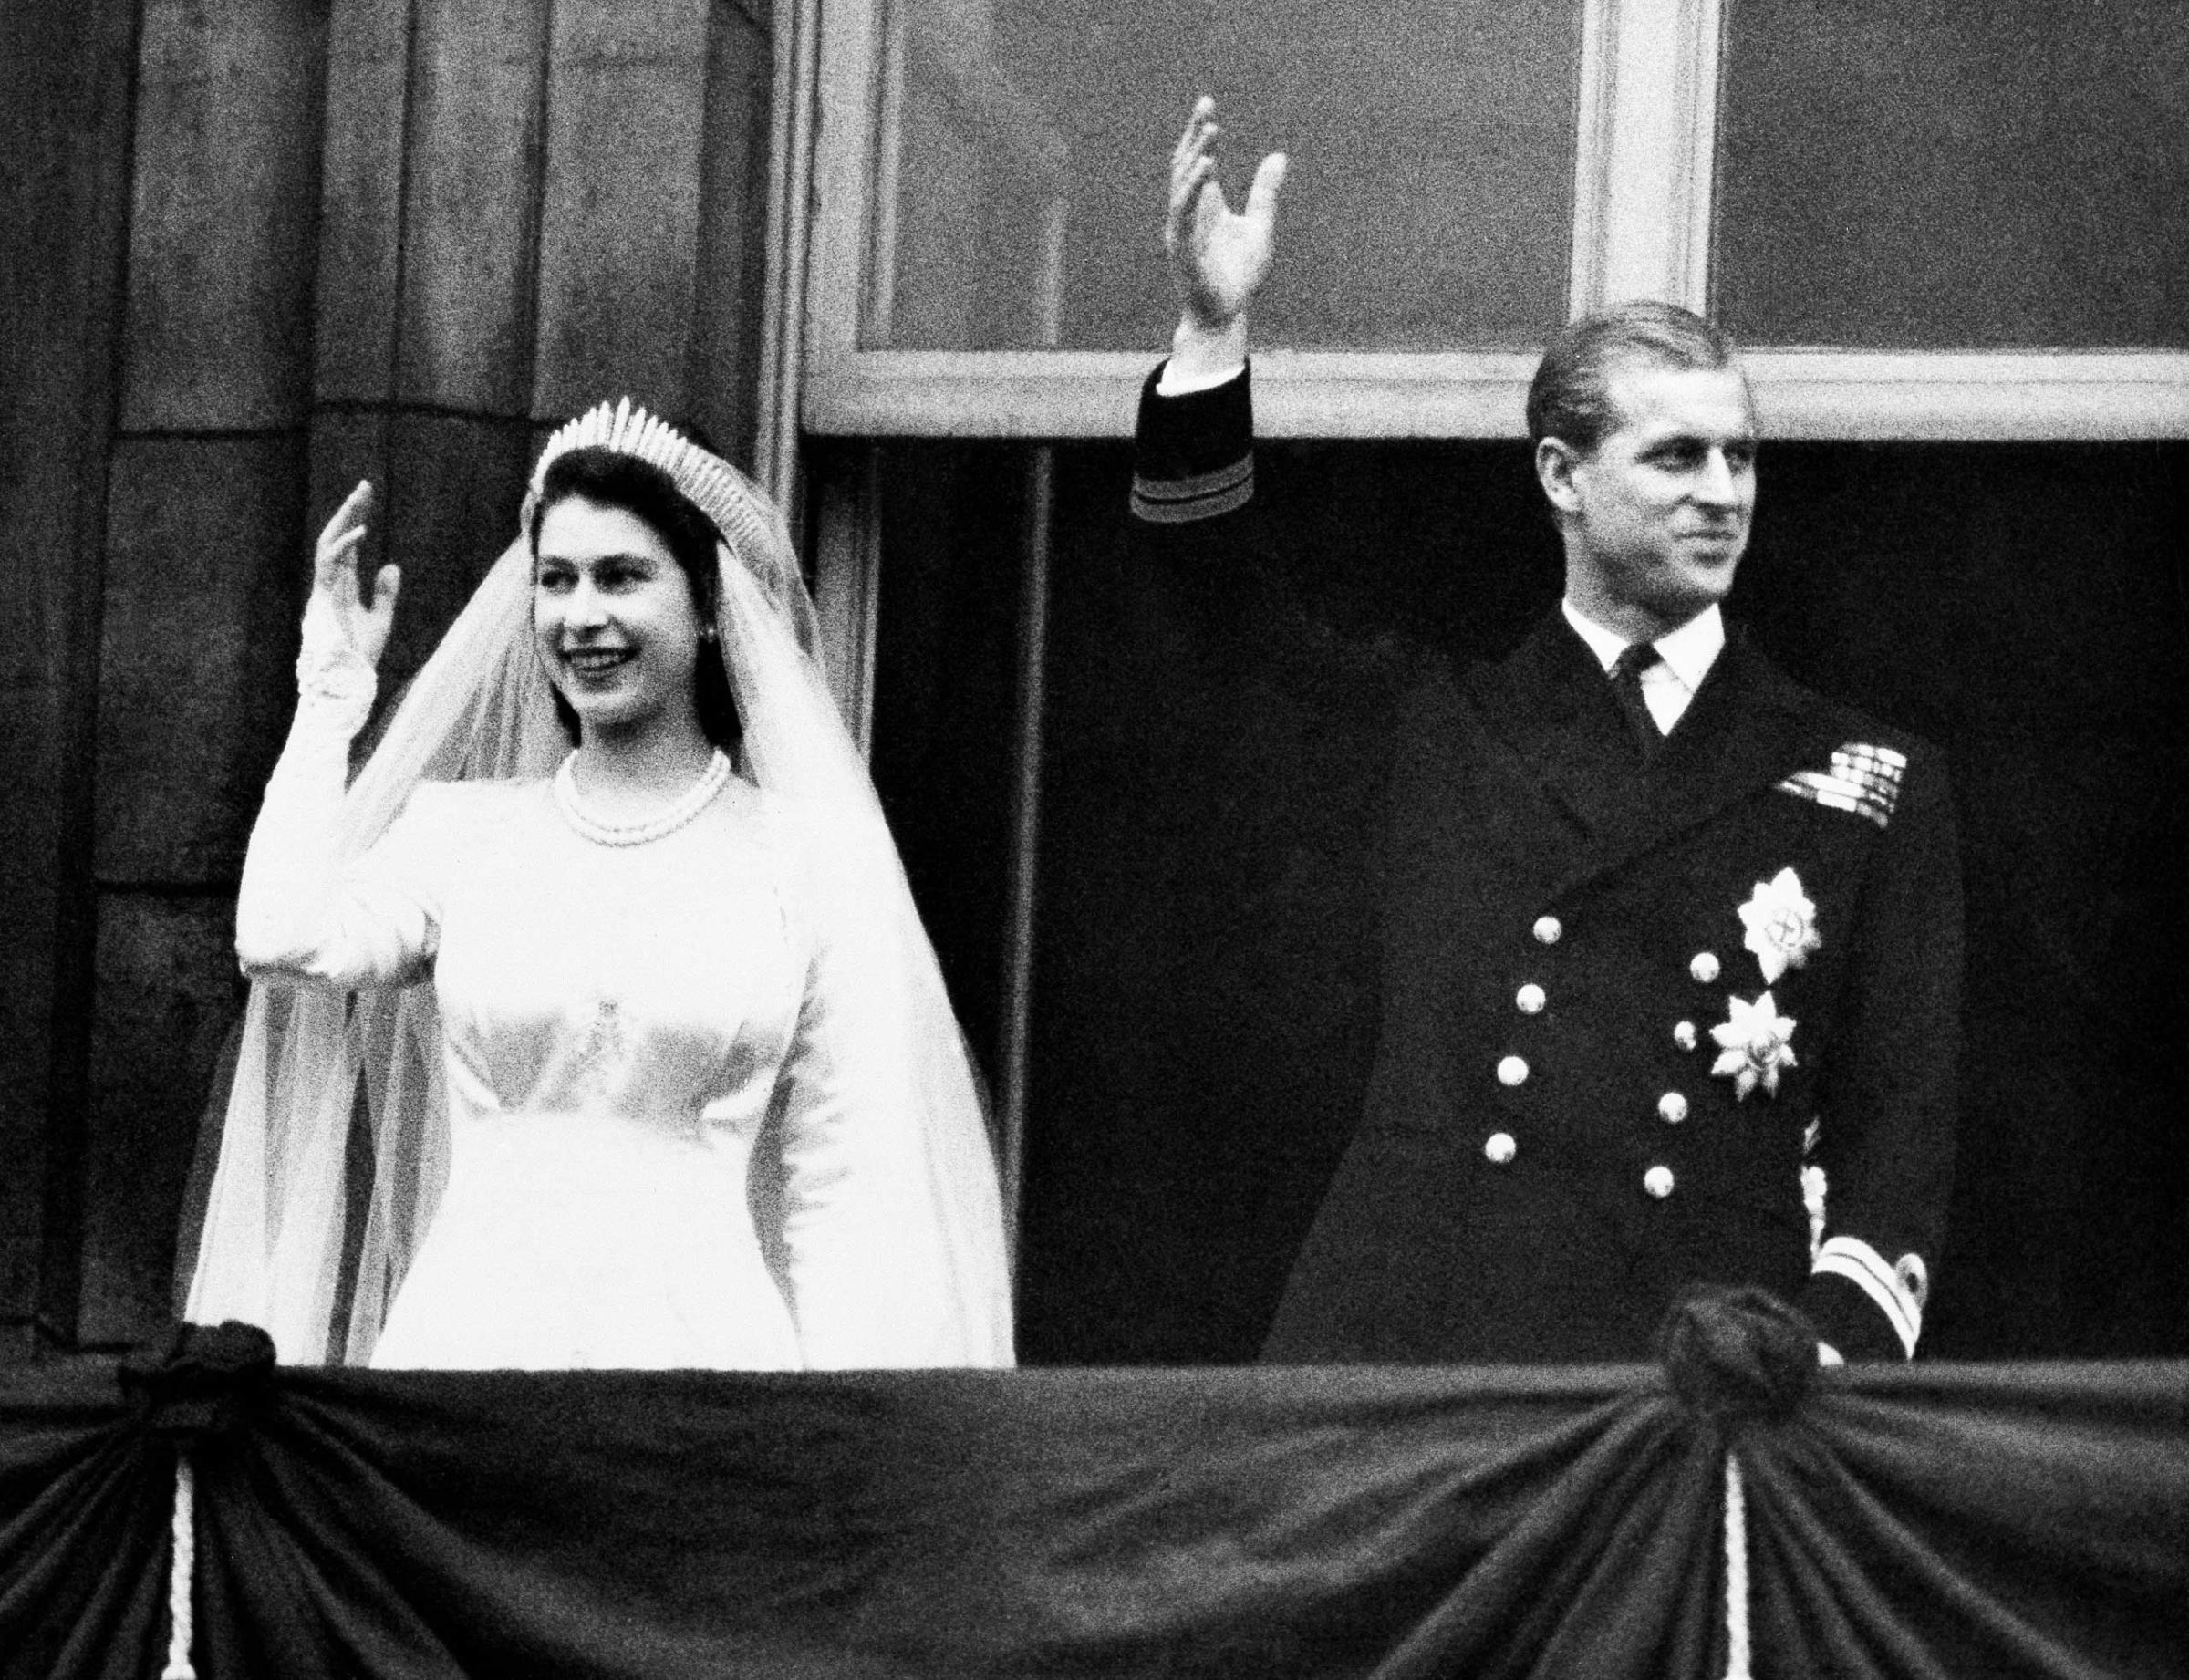 Princess Elizabeth and Prince Philip, Duke of Edinburgh wave to the crowds from the balcony of Buckingham Palace in London on their wedding day. Nov. 20,1947.